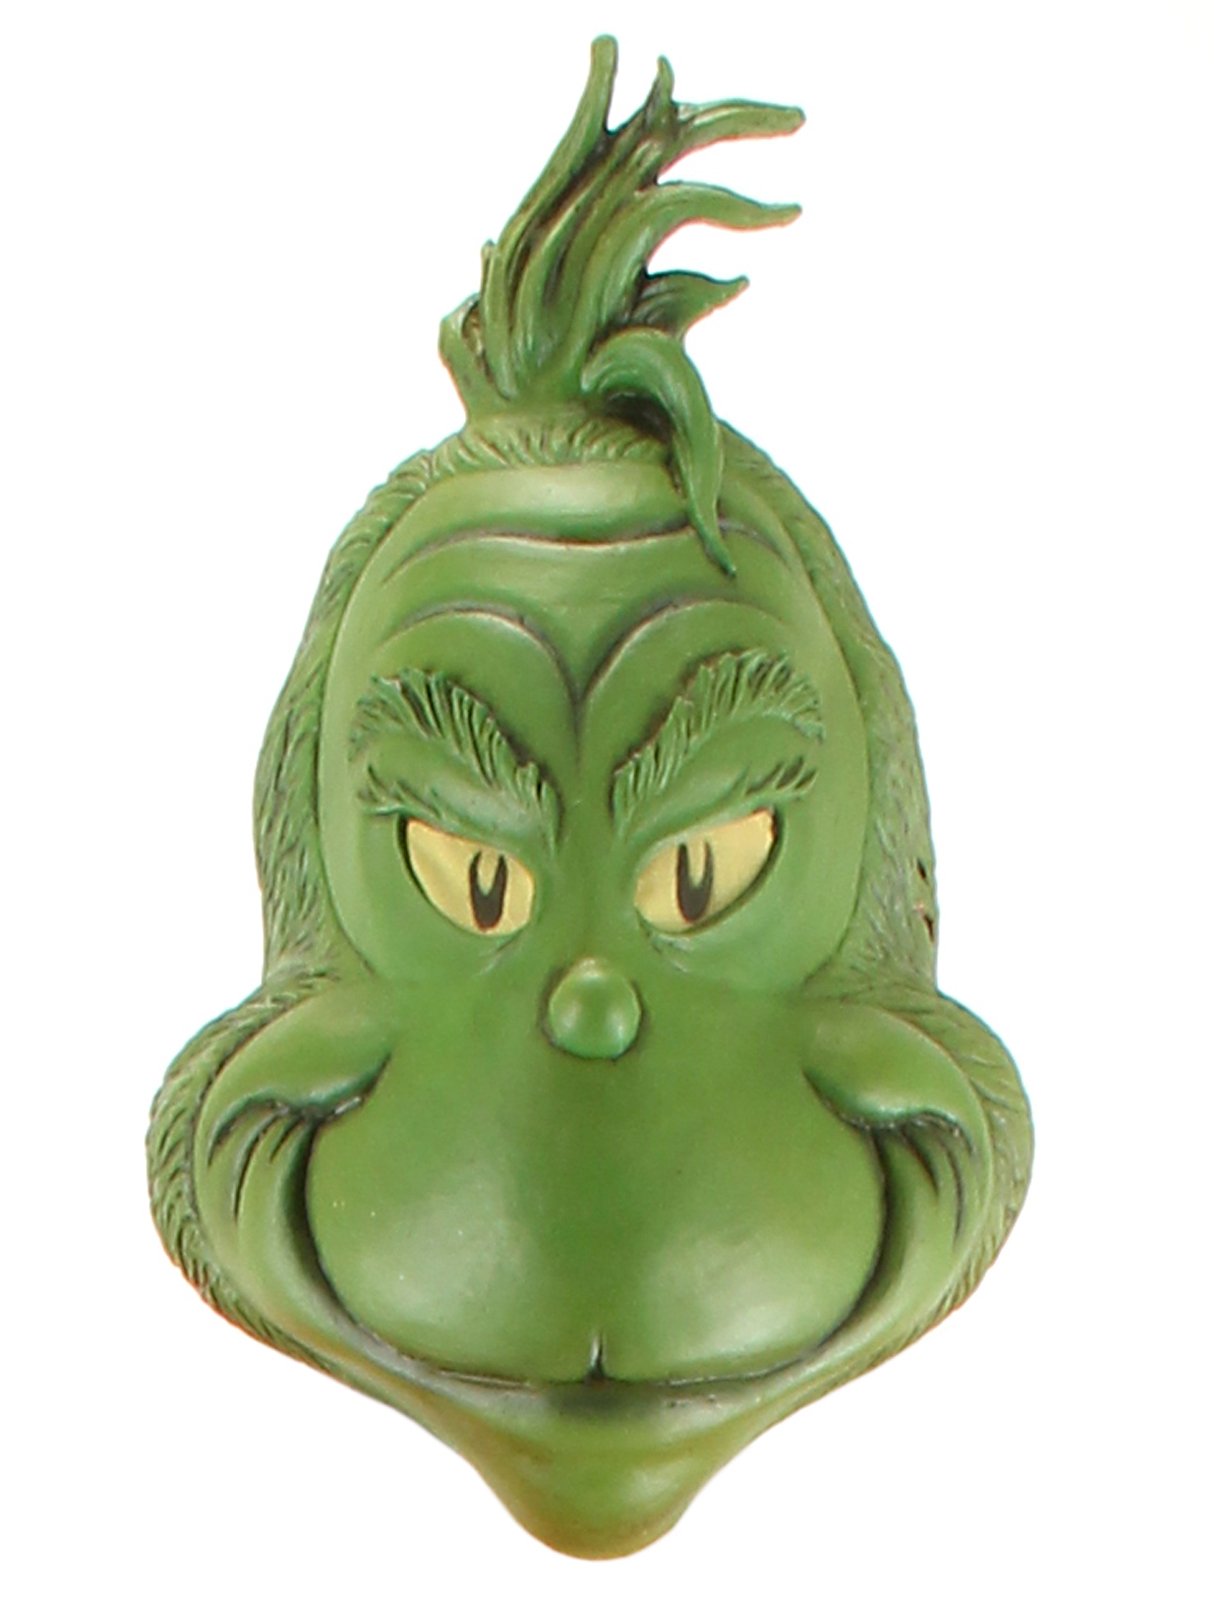 How the Grinch Stole Christmas! - The Grinch Latex Mask (Adult)